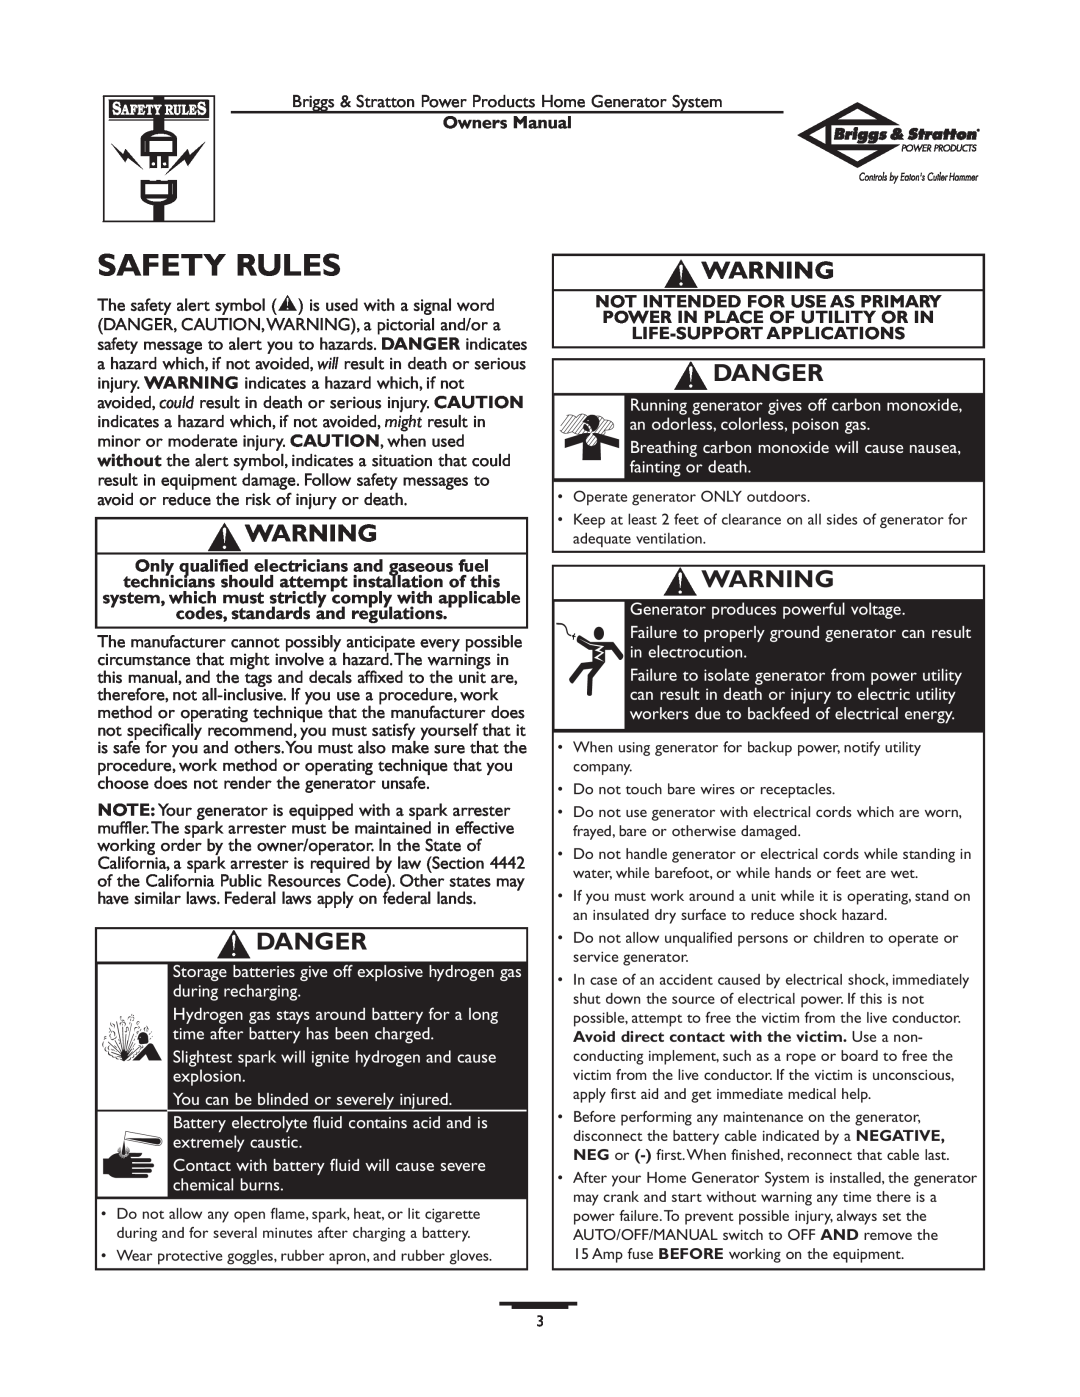 Briggs & Stratton 190839GS Safety Rules, Danger, Owners Manual, Slightest spark will ignite hydrogen and cause explosion 